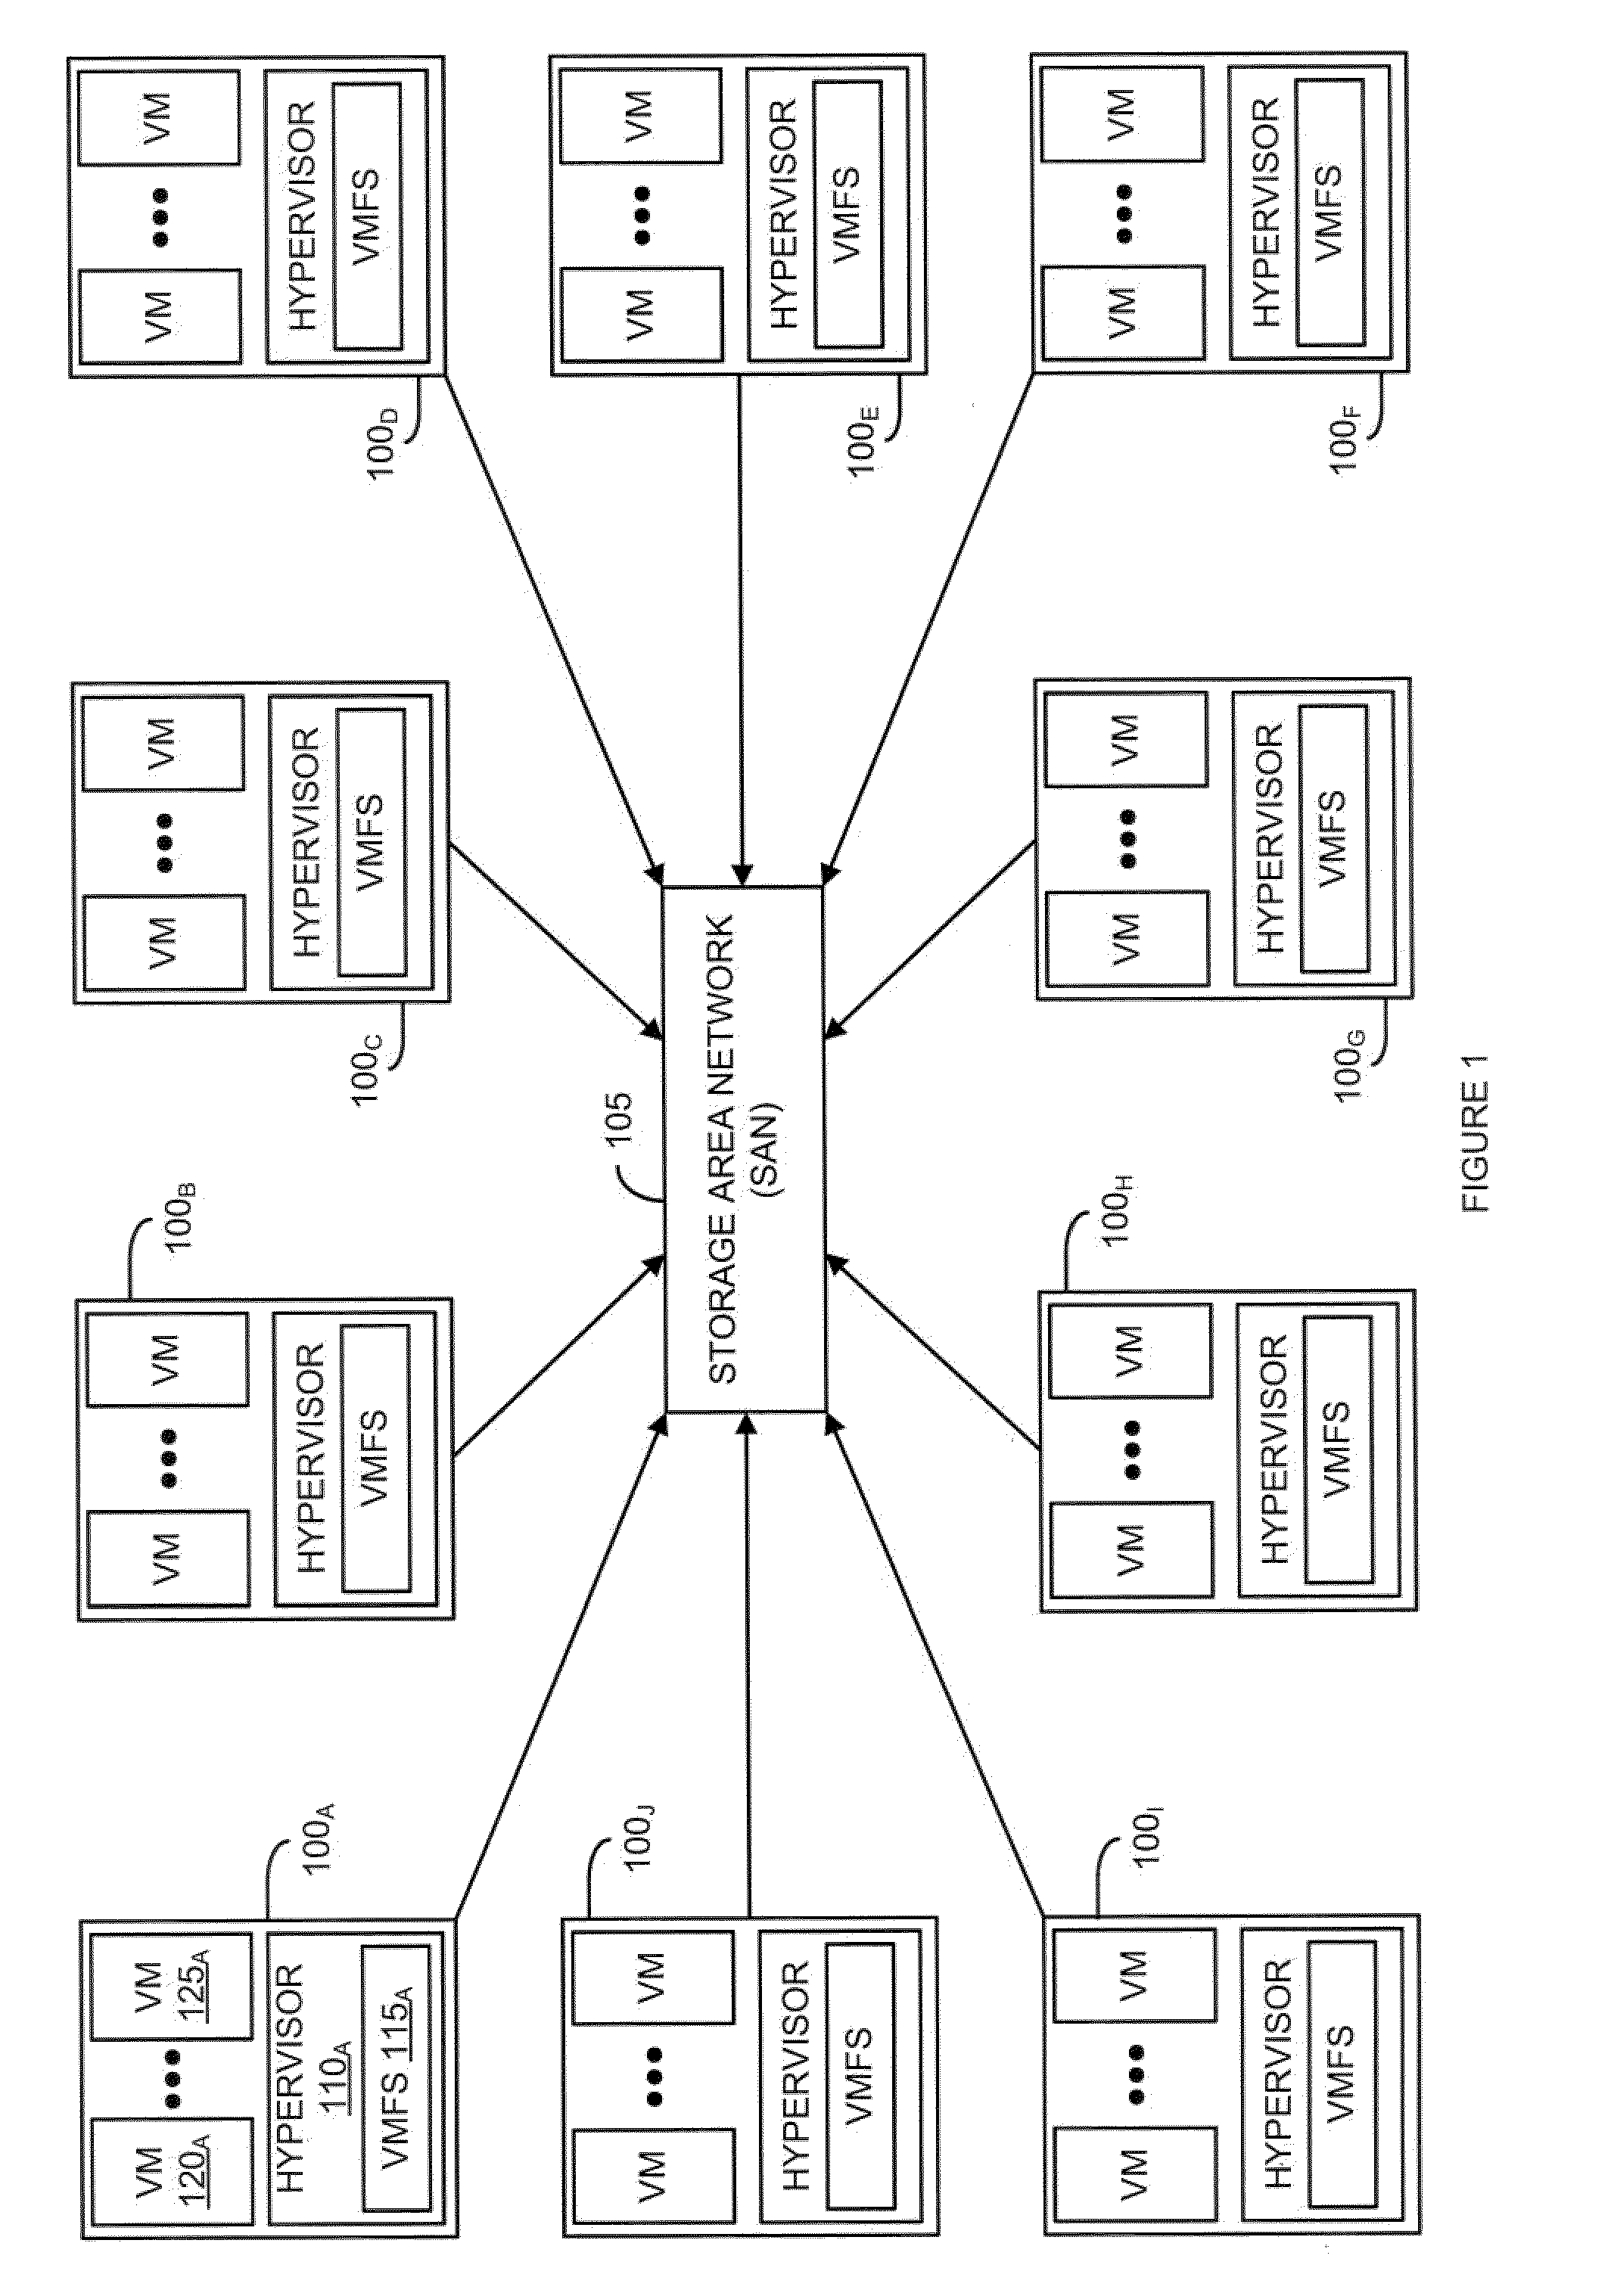 Method and System for Locating Update Operations in a Virtual Machine Disk Image